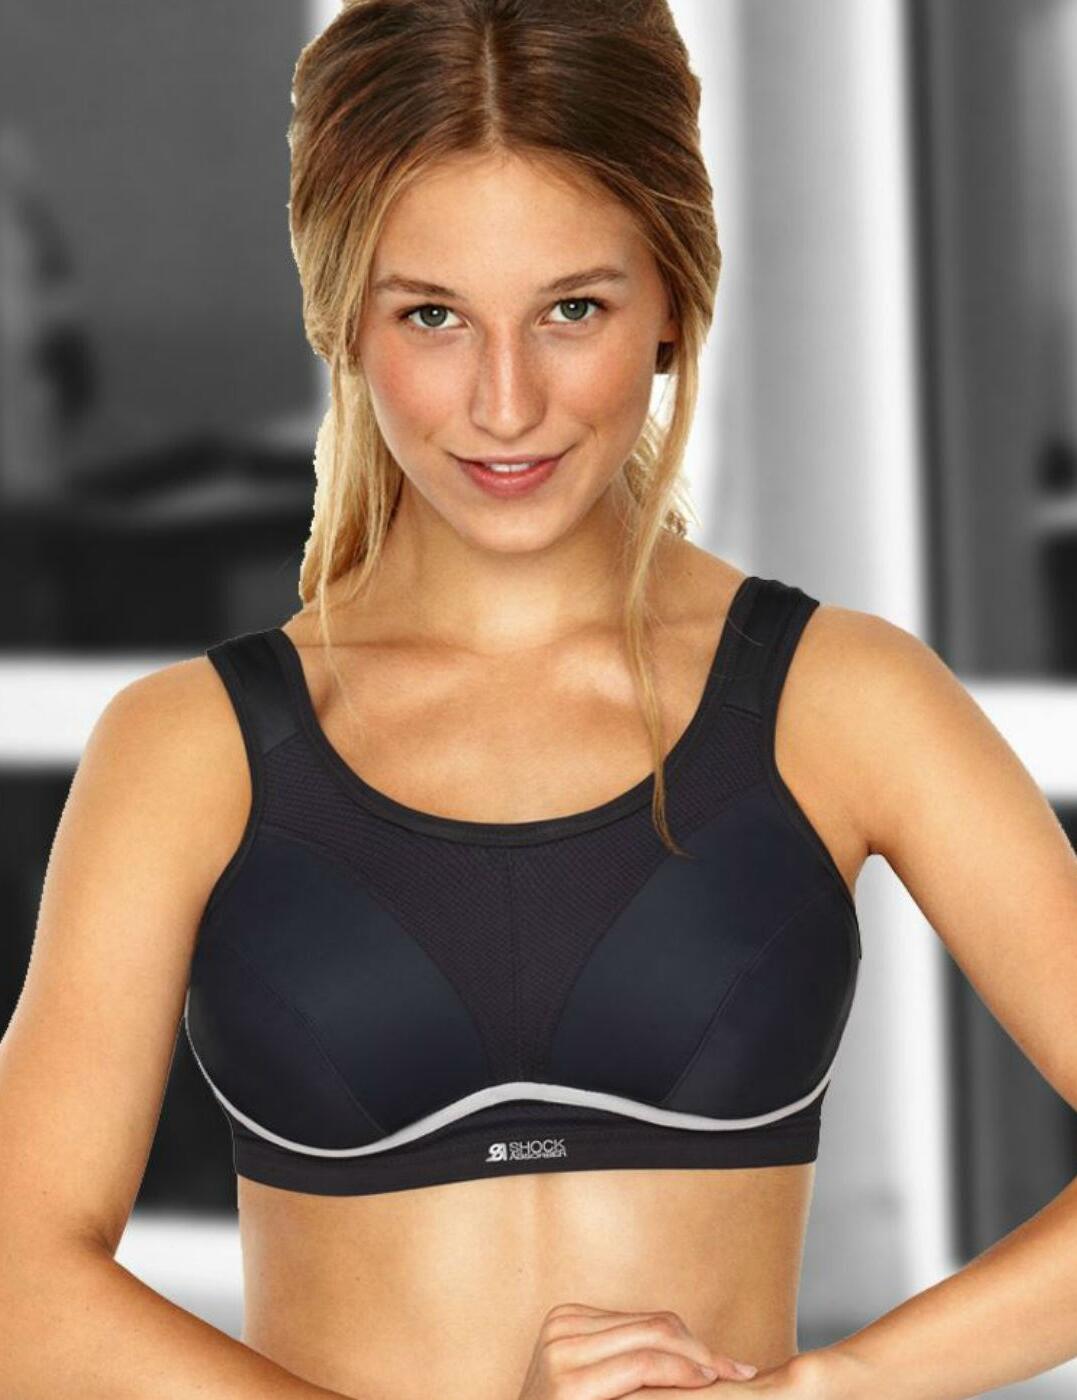 New Shock Absorber Womens Active D+ Flexi Wire Underwire Sports